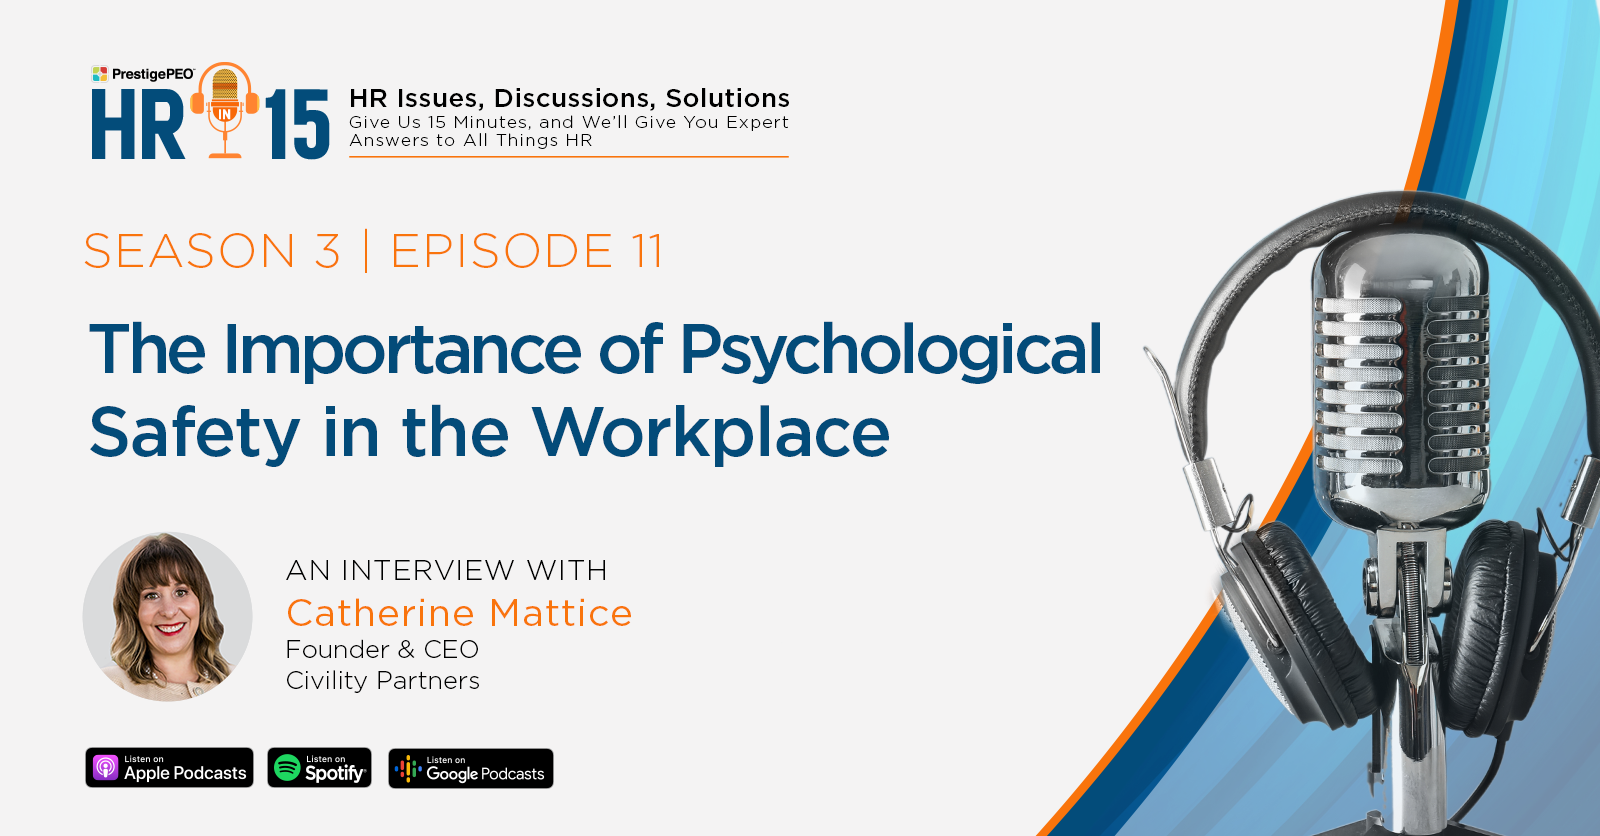 HRin15 Interview with Catherine Mattice: The Importance of Psychological Safety in the Workplace